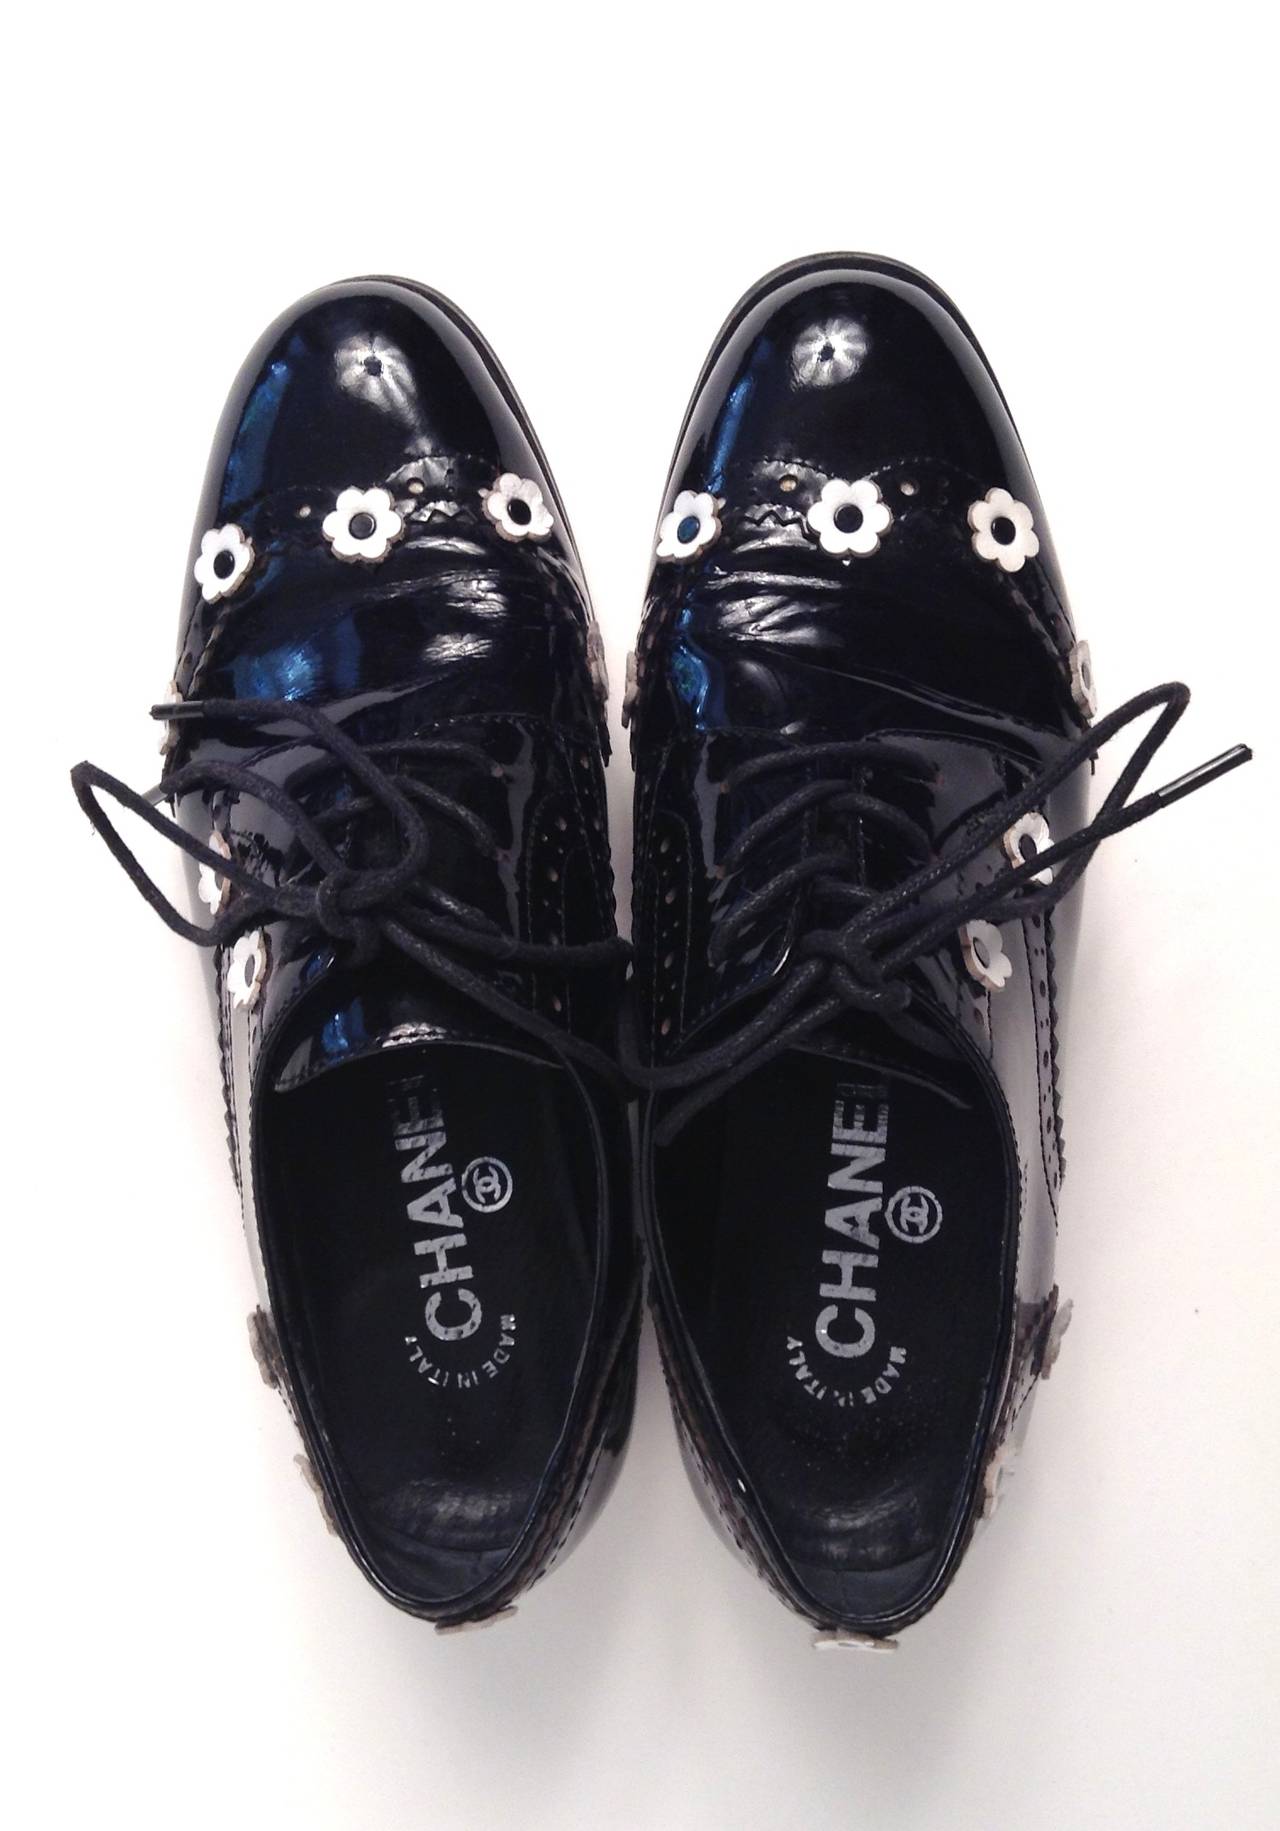 Chanel Black Patent Oxfords with Daisies Size 5 1